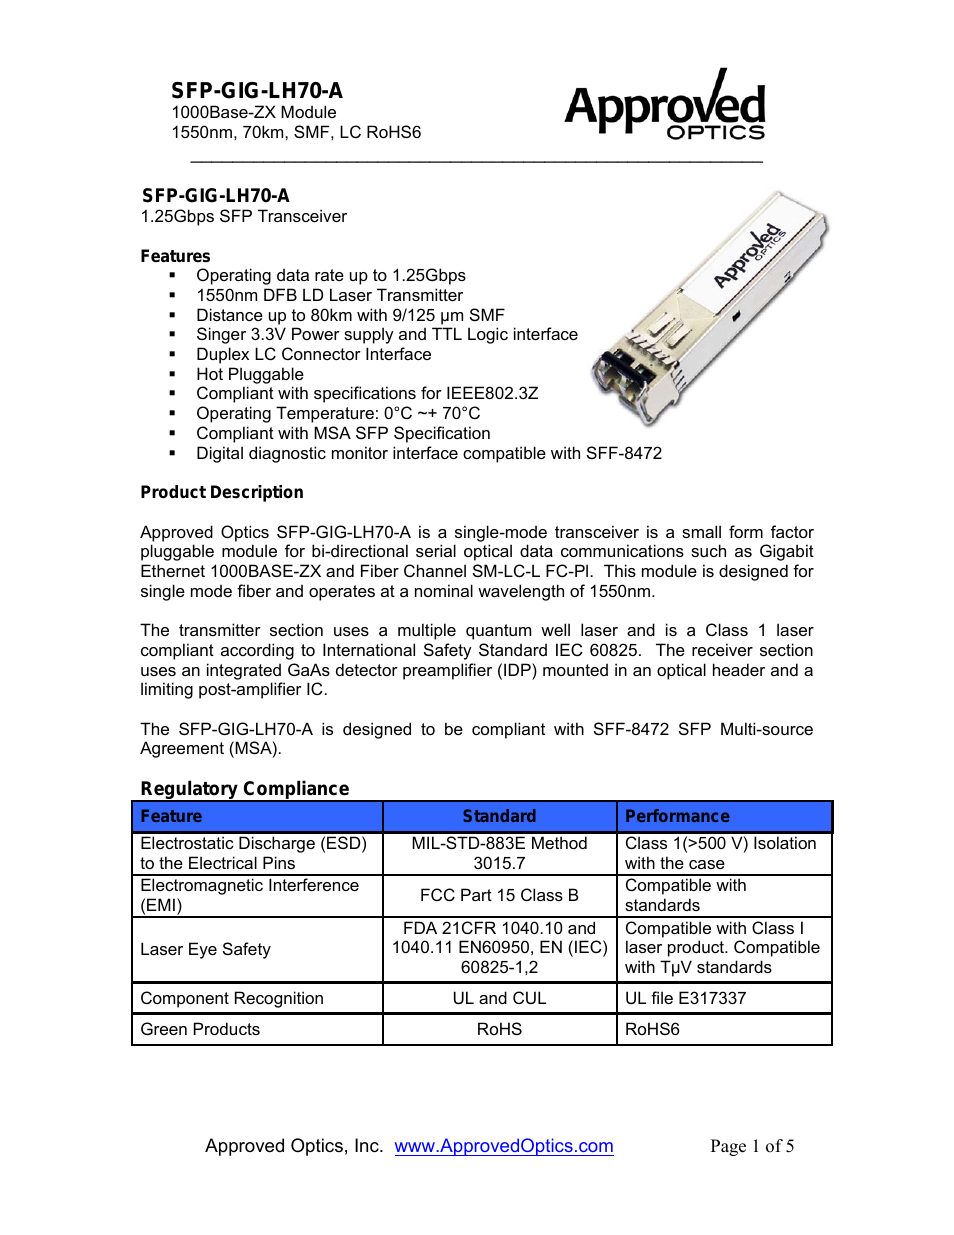 Approved ALCATEL SFP-GIG-LH70